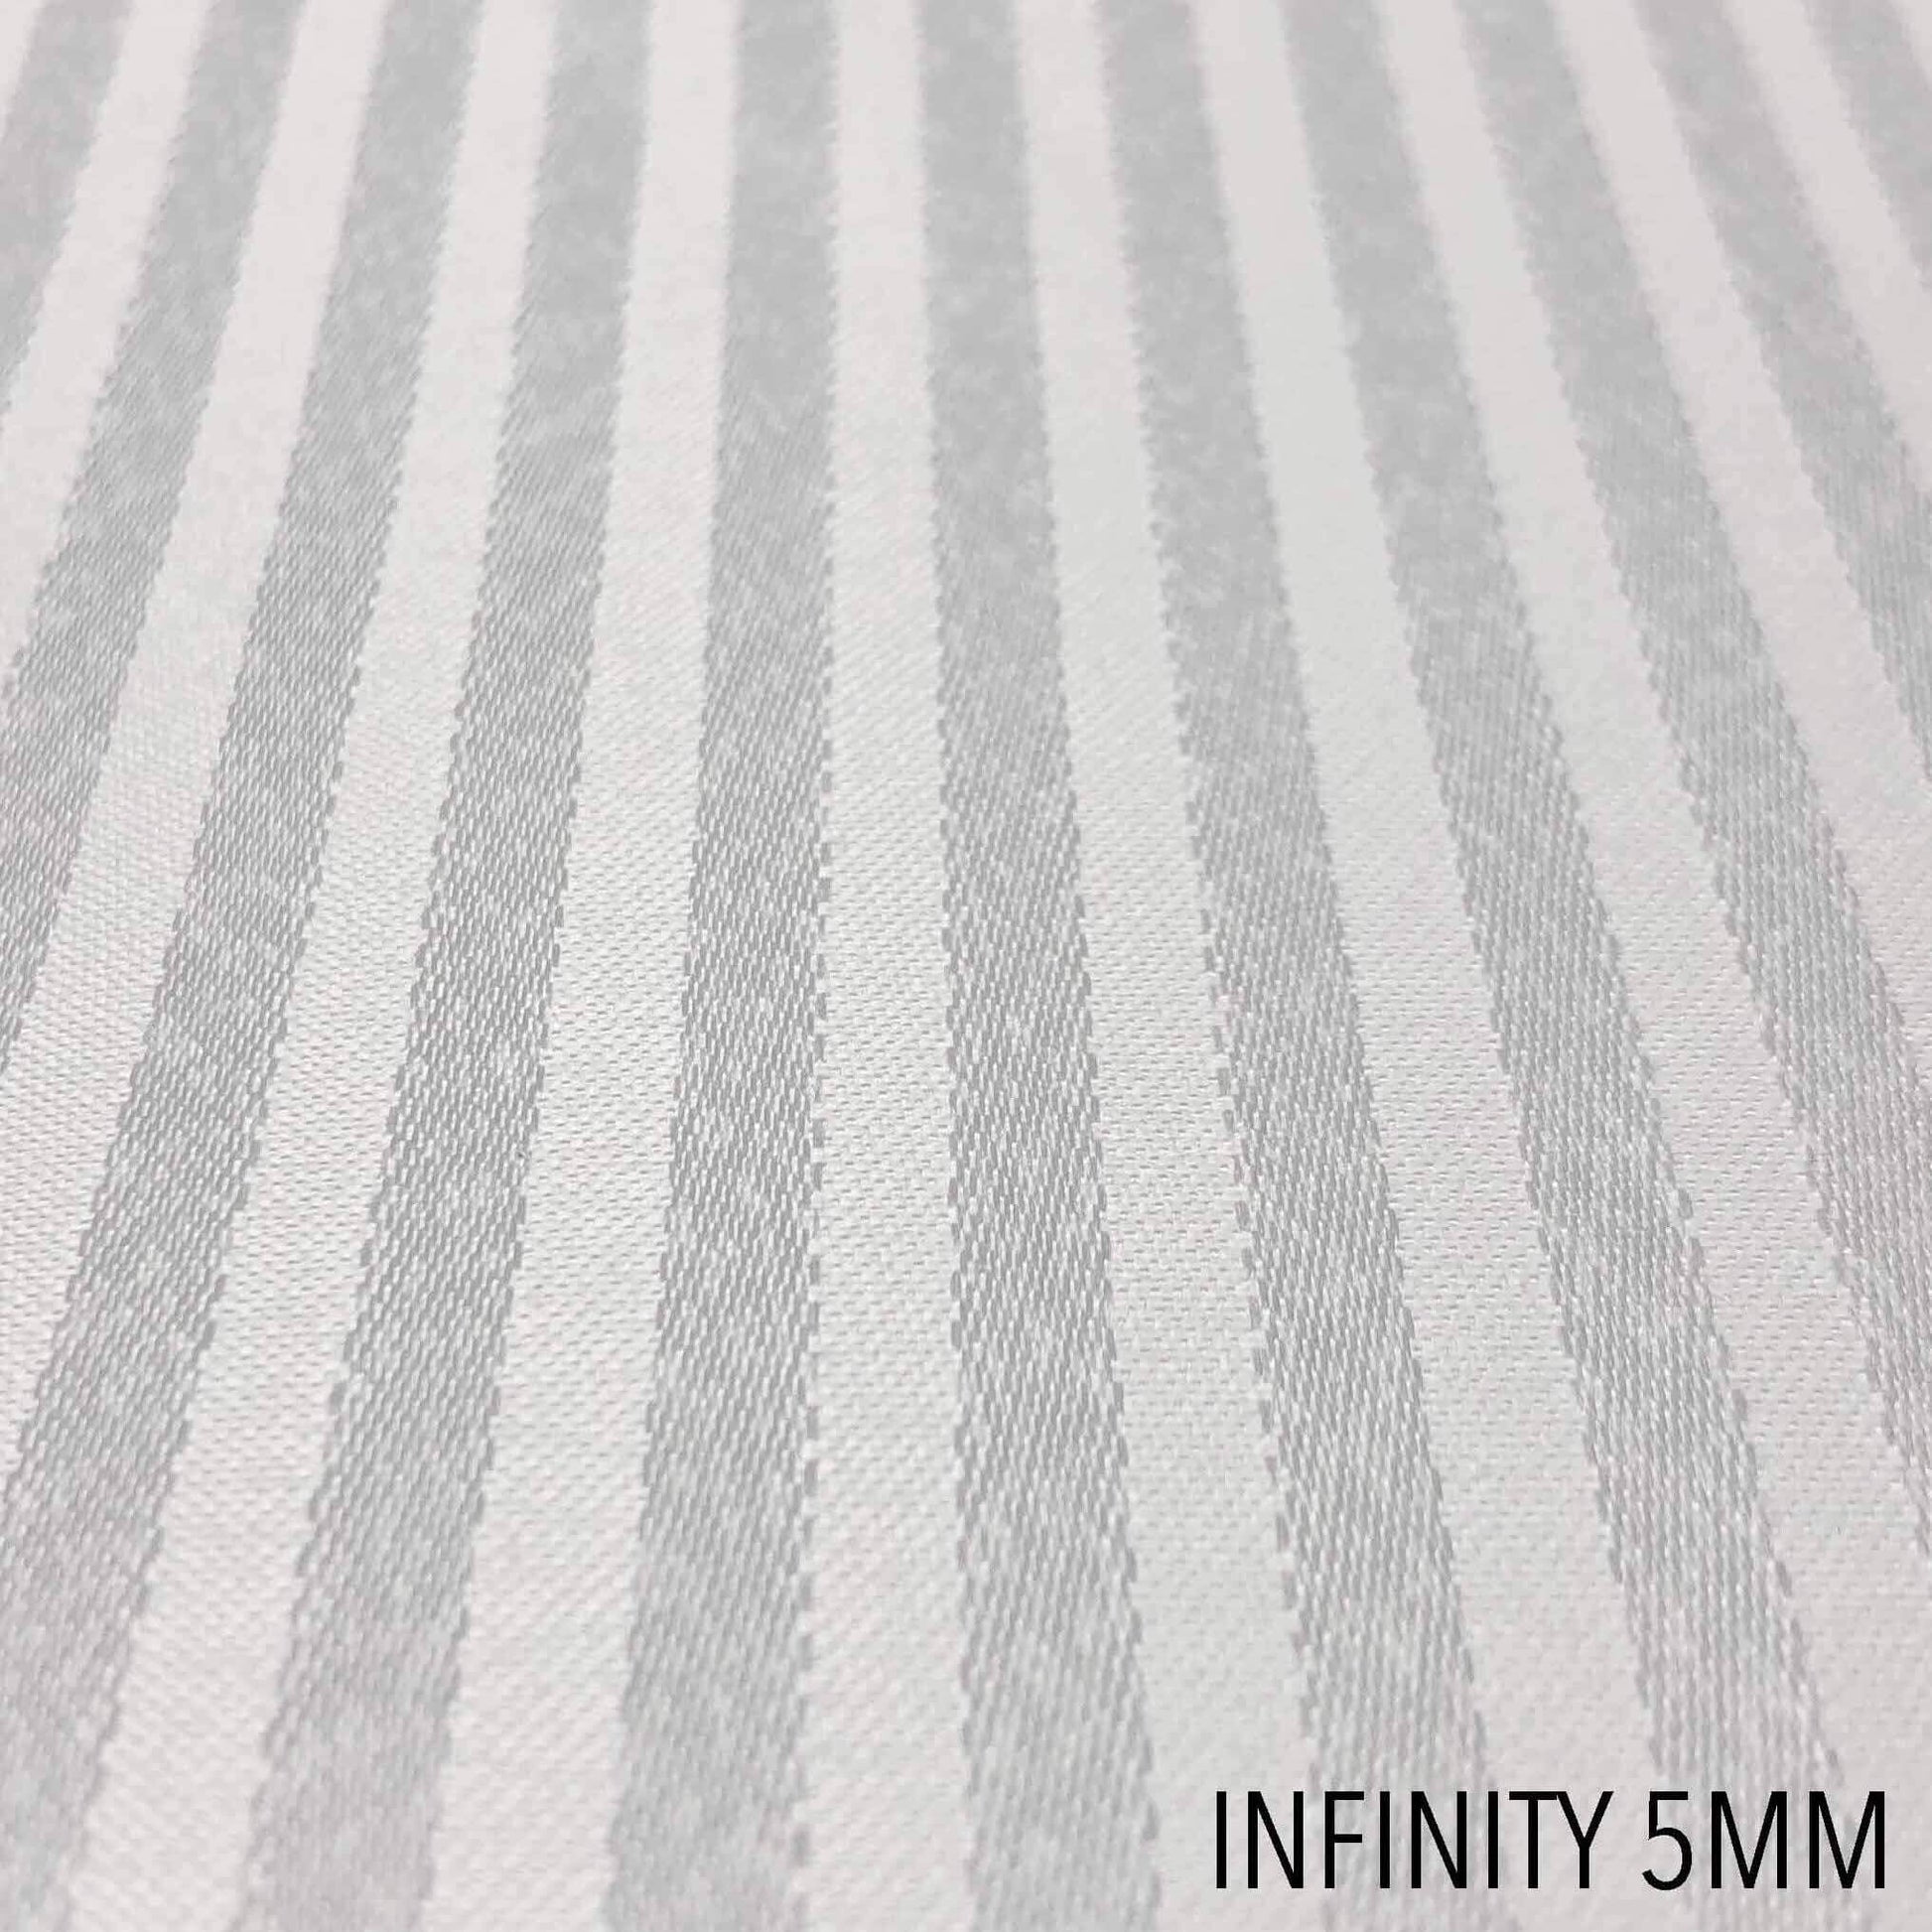 Infinity 5mm Stripes Decorative Top Sheet-Bed Sheets-